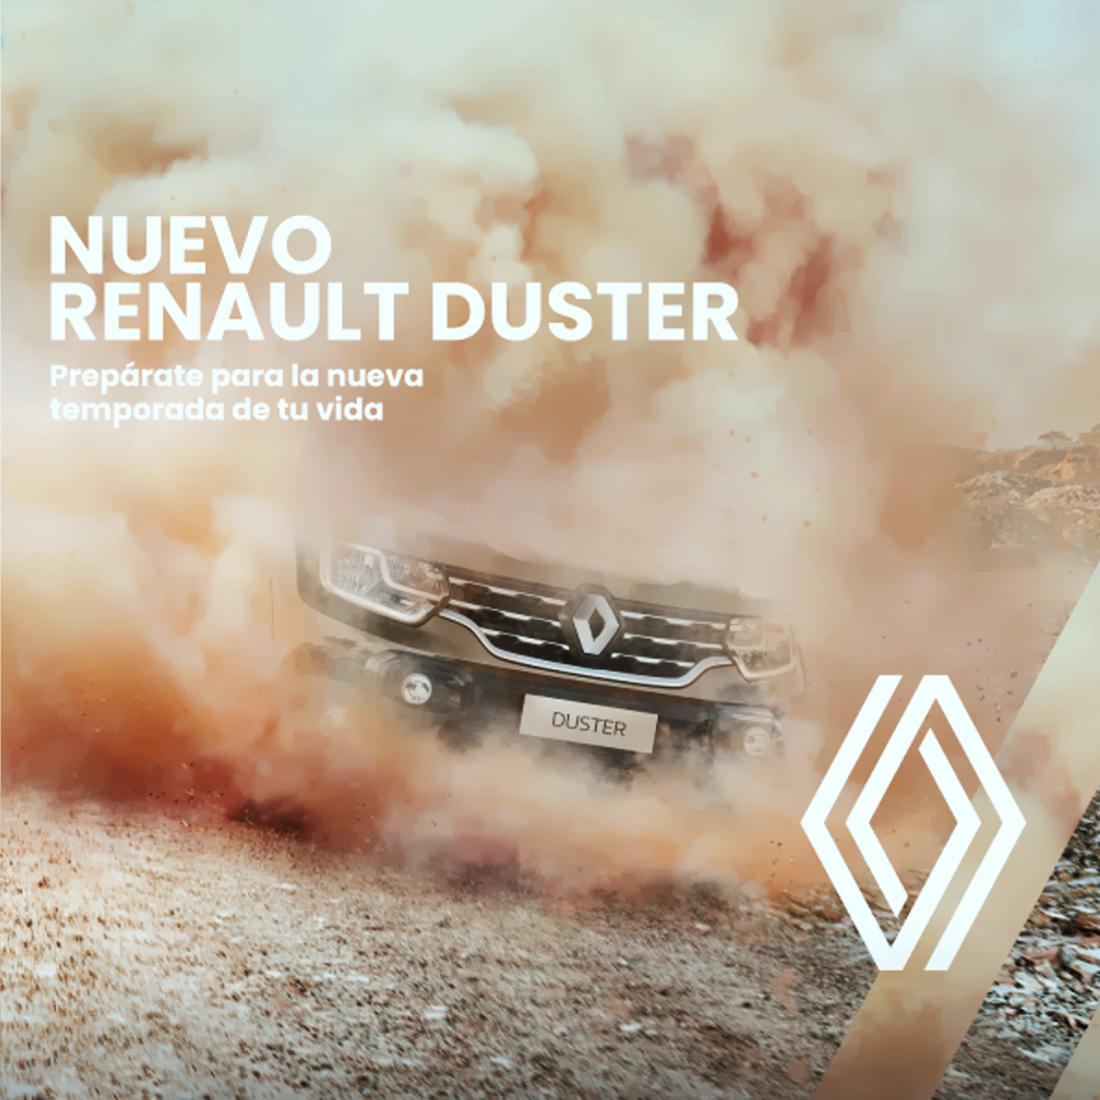 renault duster turbo colombia, renault duster turbo 2022, renault duster turbo fotos espia, renault duster turbo caracteristicas, renault duster turbo fotos, renault duster turbo novedades, renault duster turbo argentina, renault duster turbo america latina